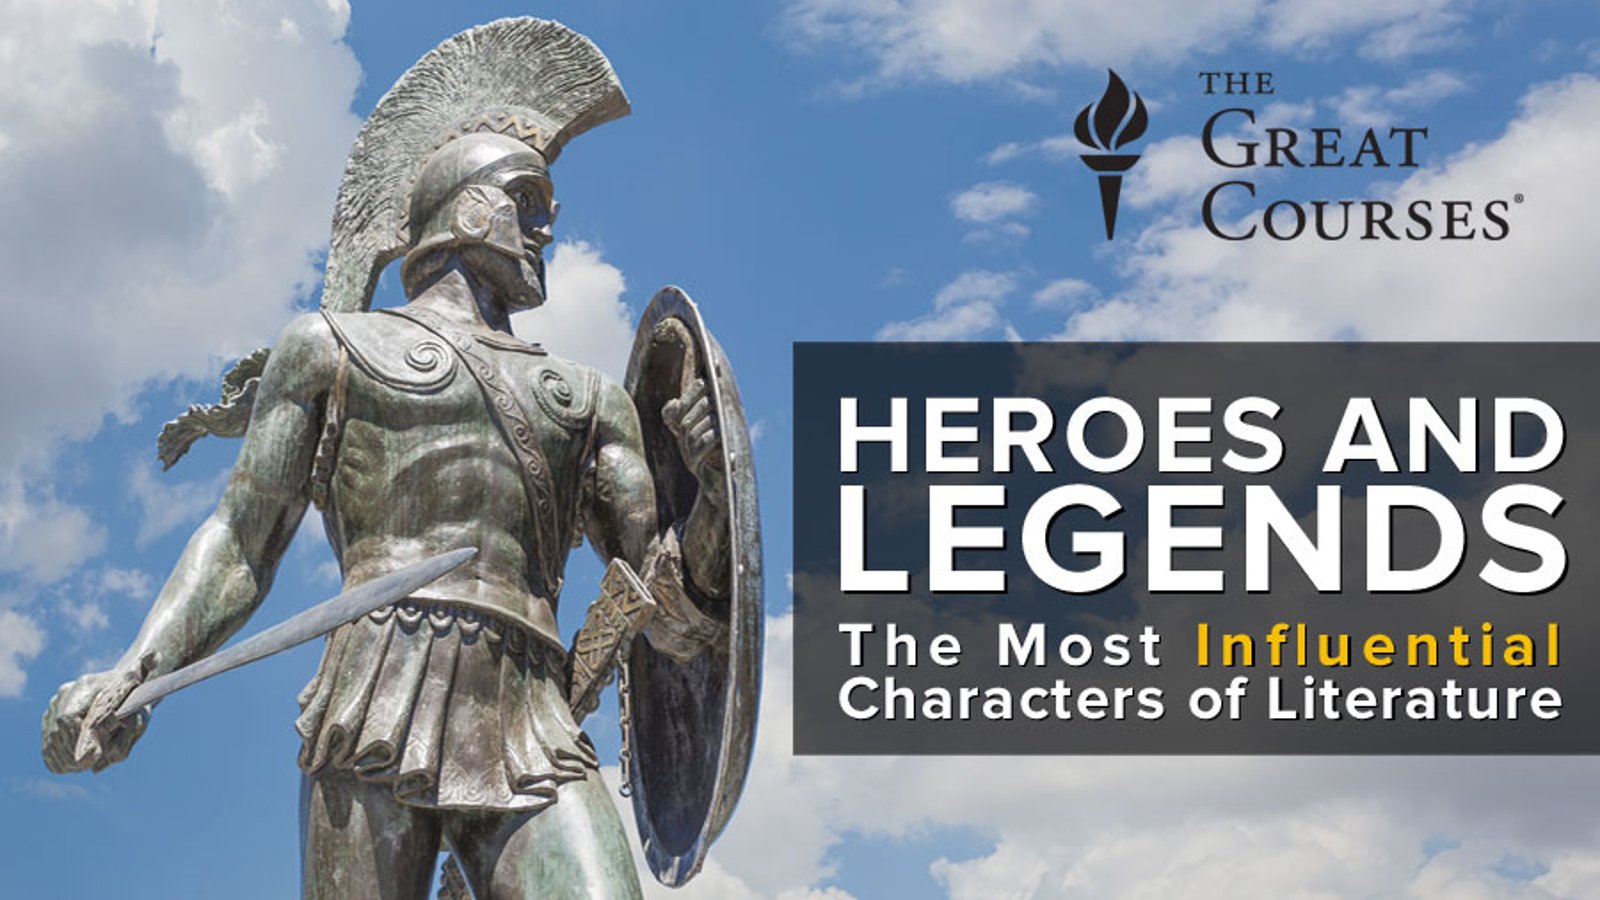 Heroes and Legends - The Most Influential Characters of Literature